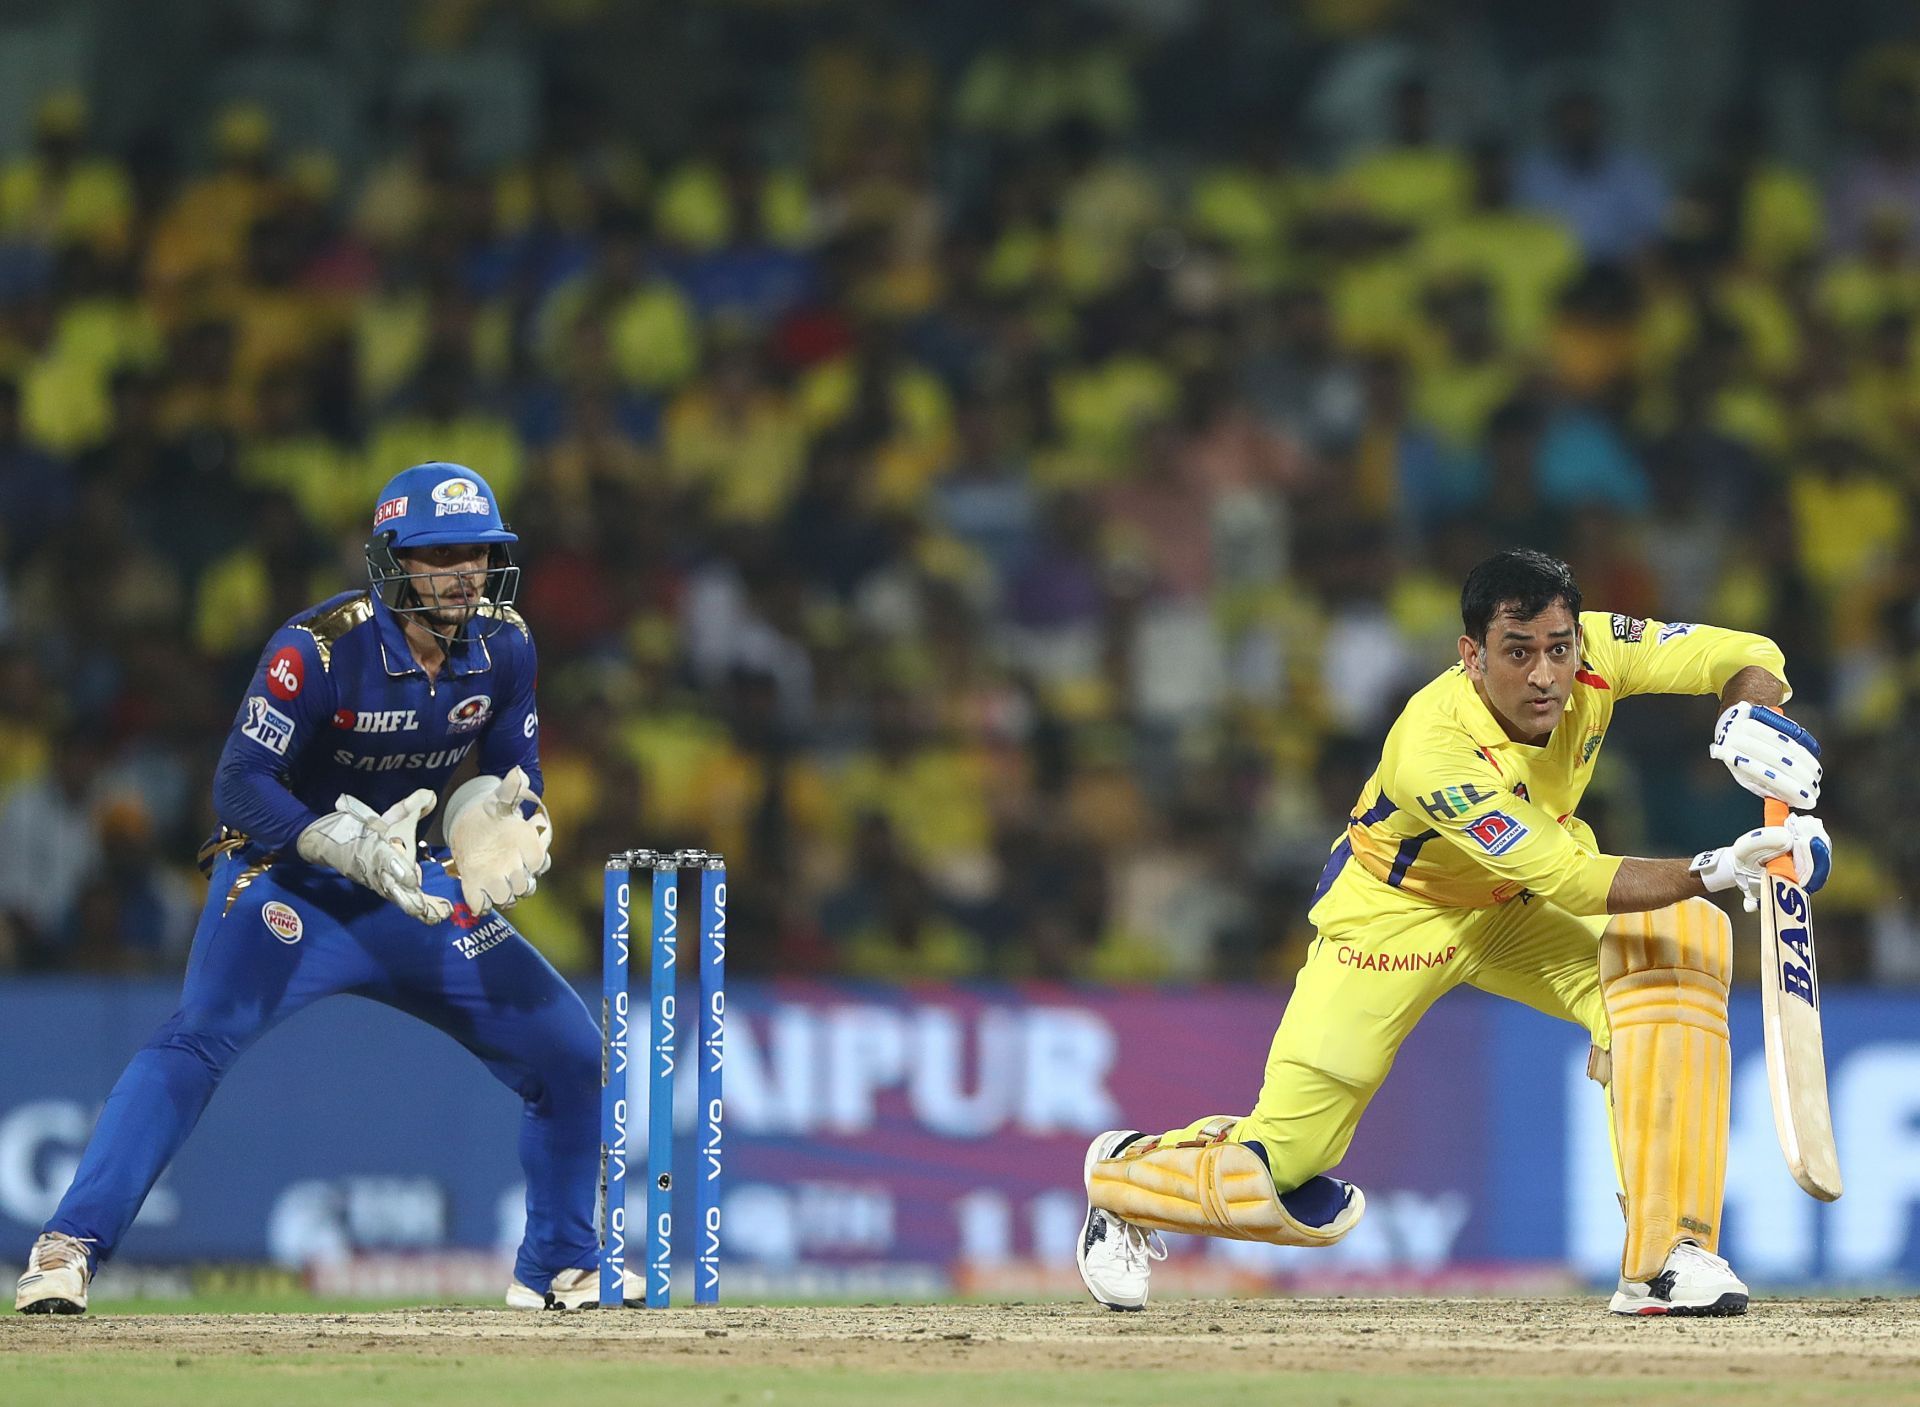 MS Dhoni batting against Mumbai Indians. Pic: Getty Images